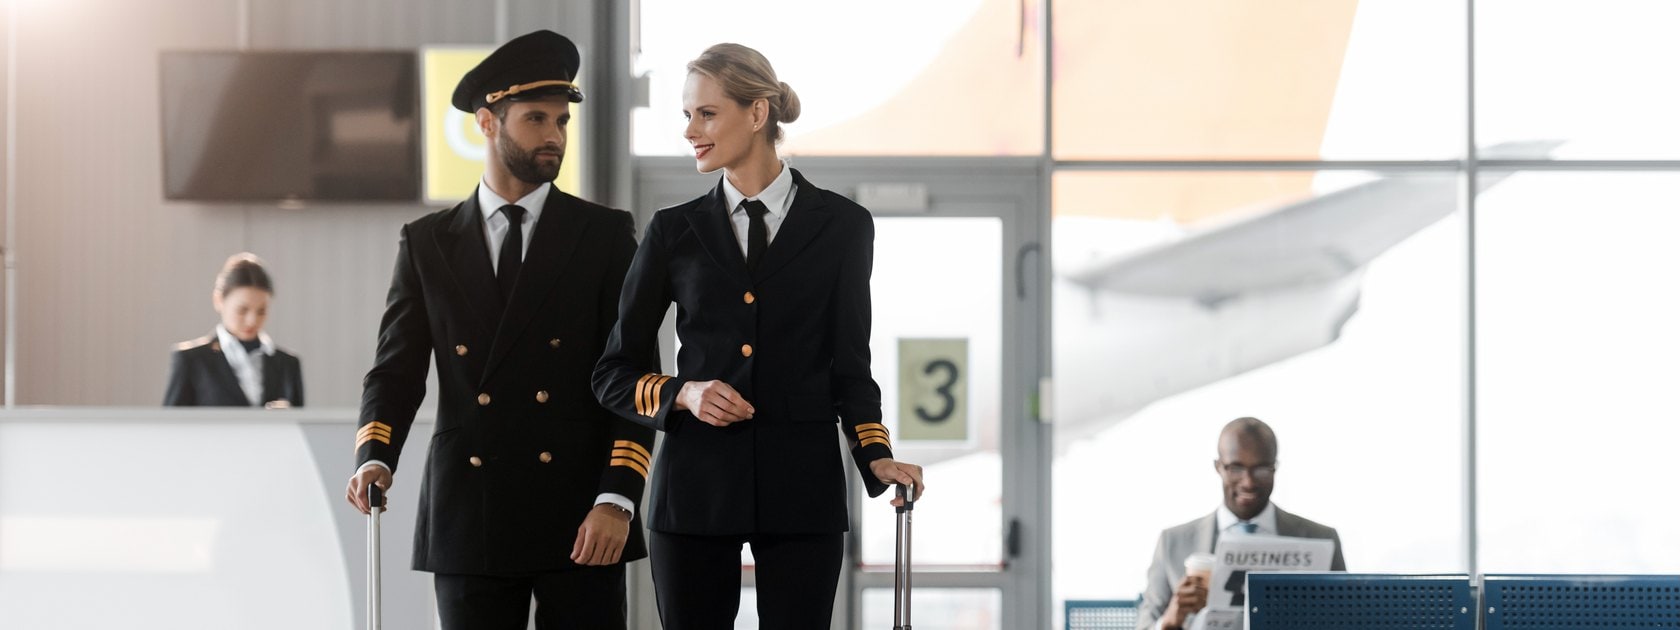 A male and female pilot walking through an airport.